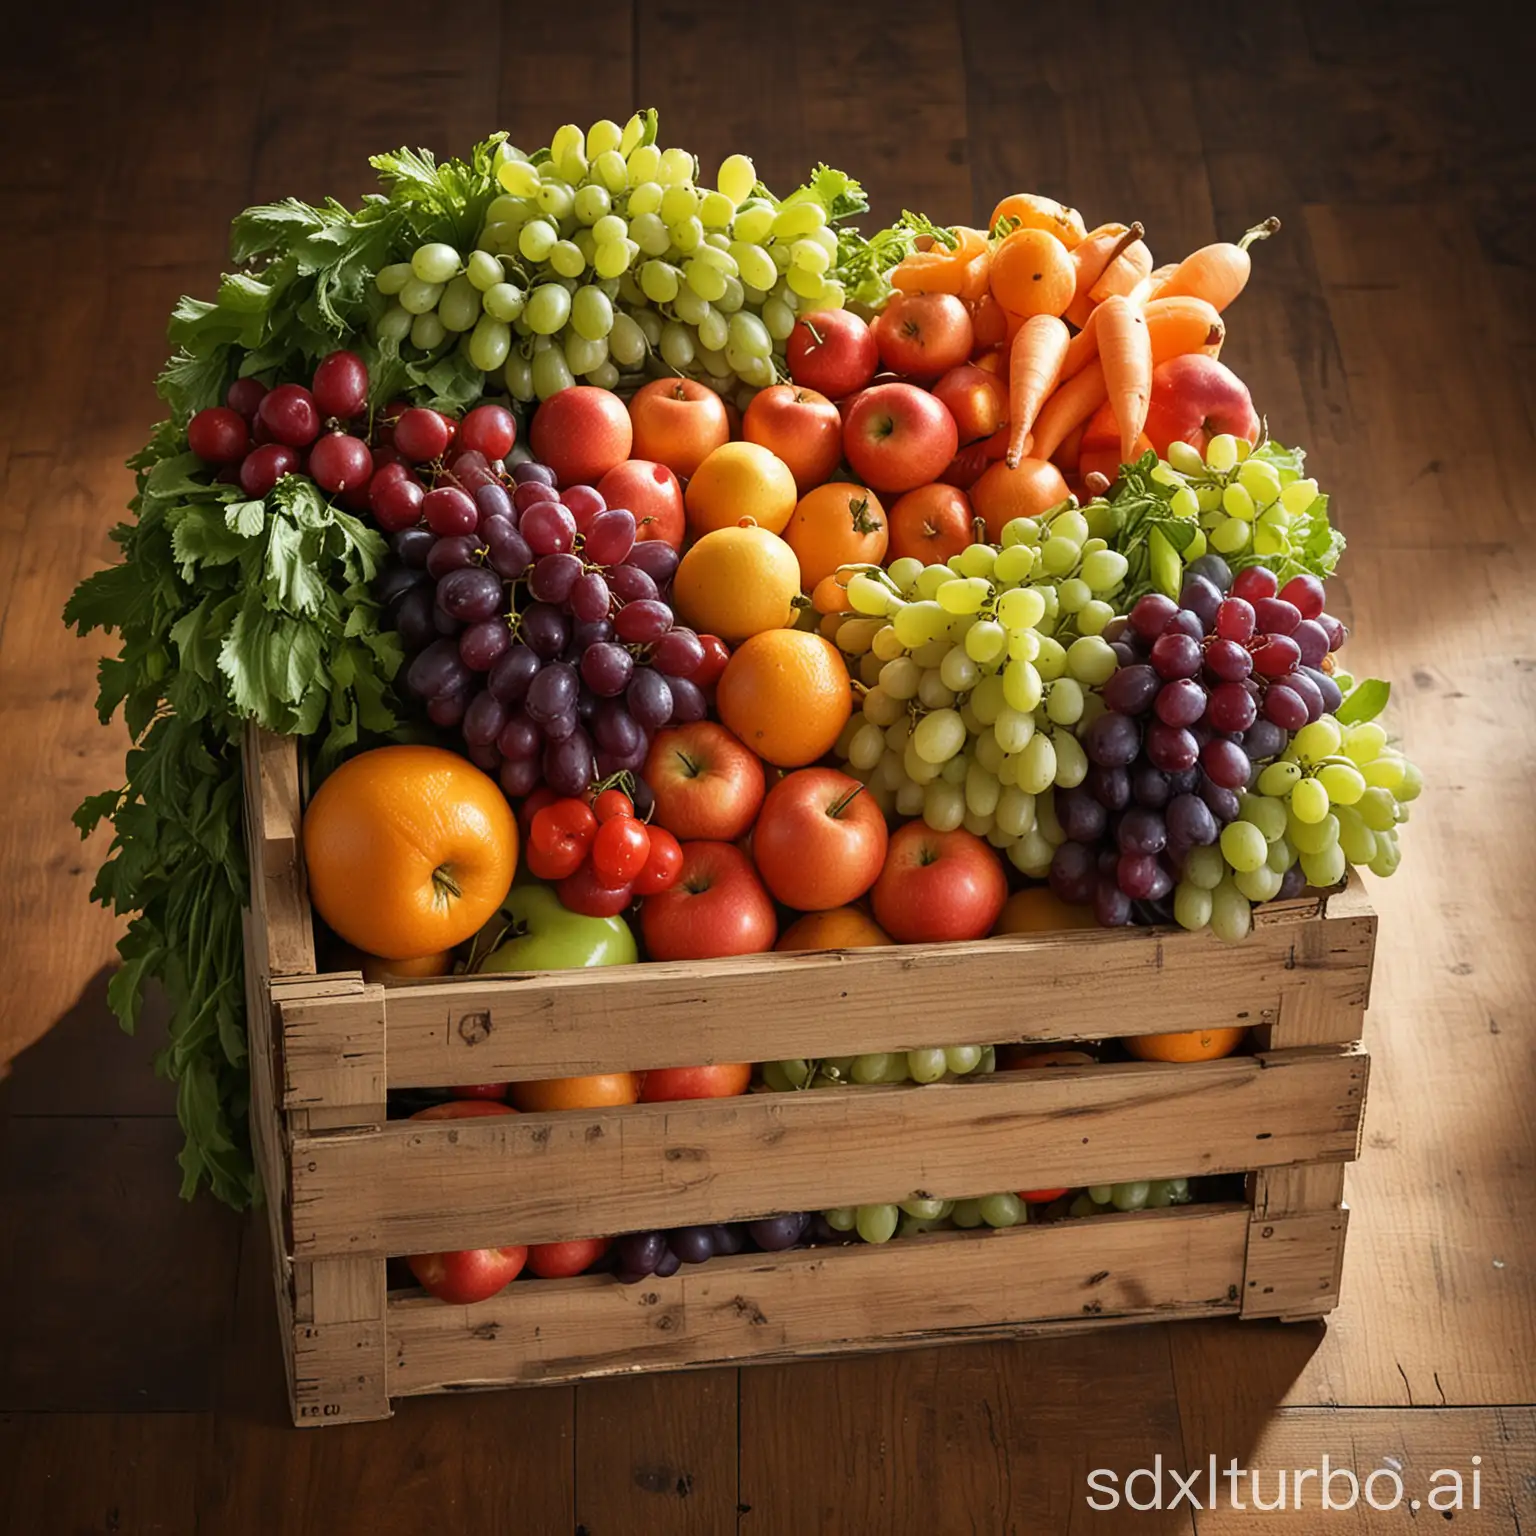 A colorful assortment of fresh fruits and vegetables, including apples, oranges, bananas, grapes, carrots, and celery, are piled high in a wooden crate. The light shining on the produce creates a warm, inviting glow, and the vibrant colors of the fruits and vegetables are sure to catch the eye.